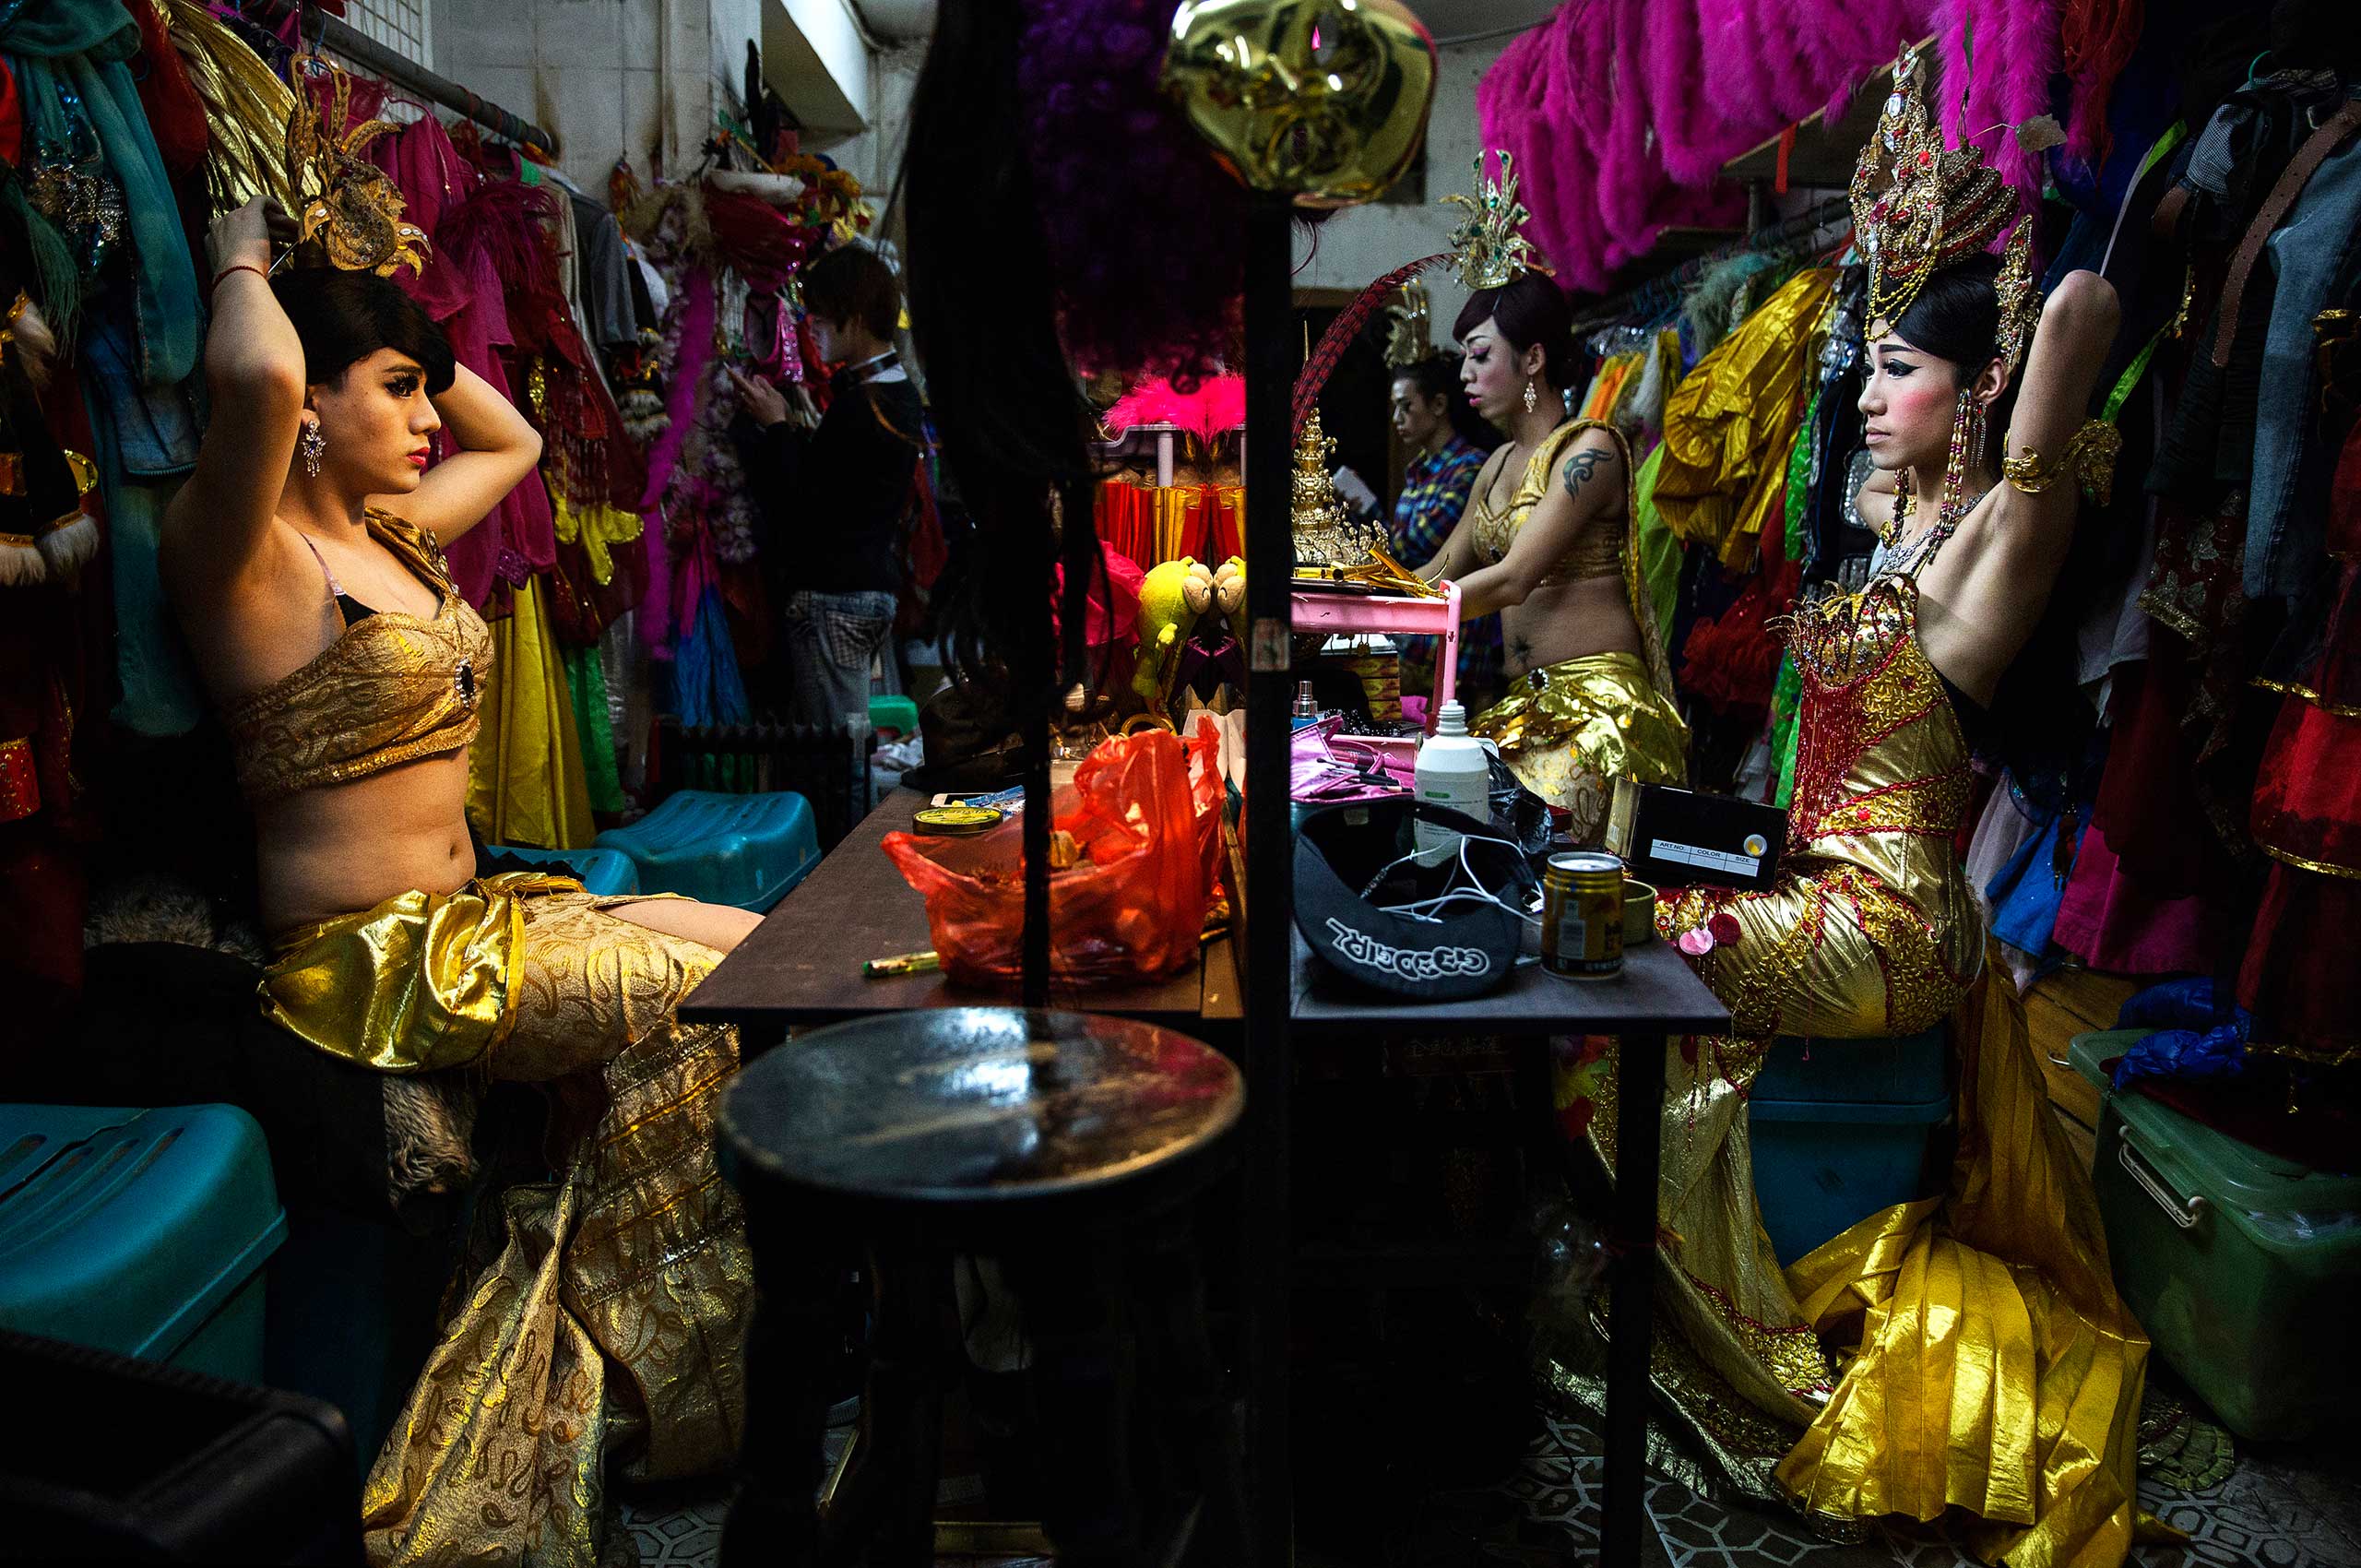 Chinese drag queens get ready backstage before performing at the Chunai 98 club in Nanning, Guangxi Province, southern China, Jan. 10, 2015.